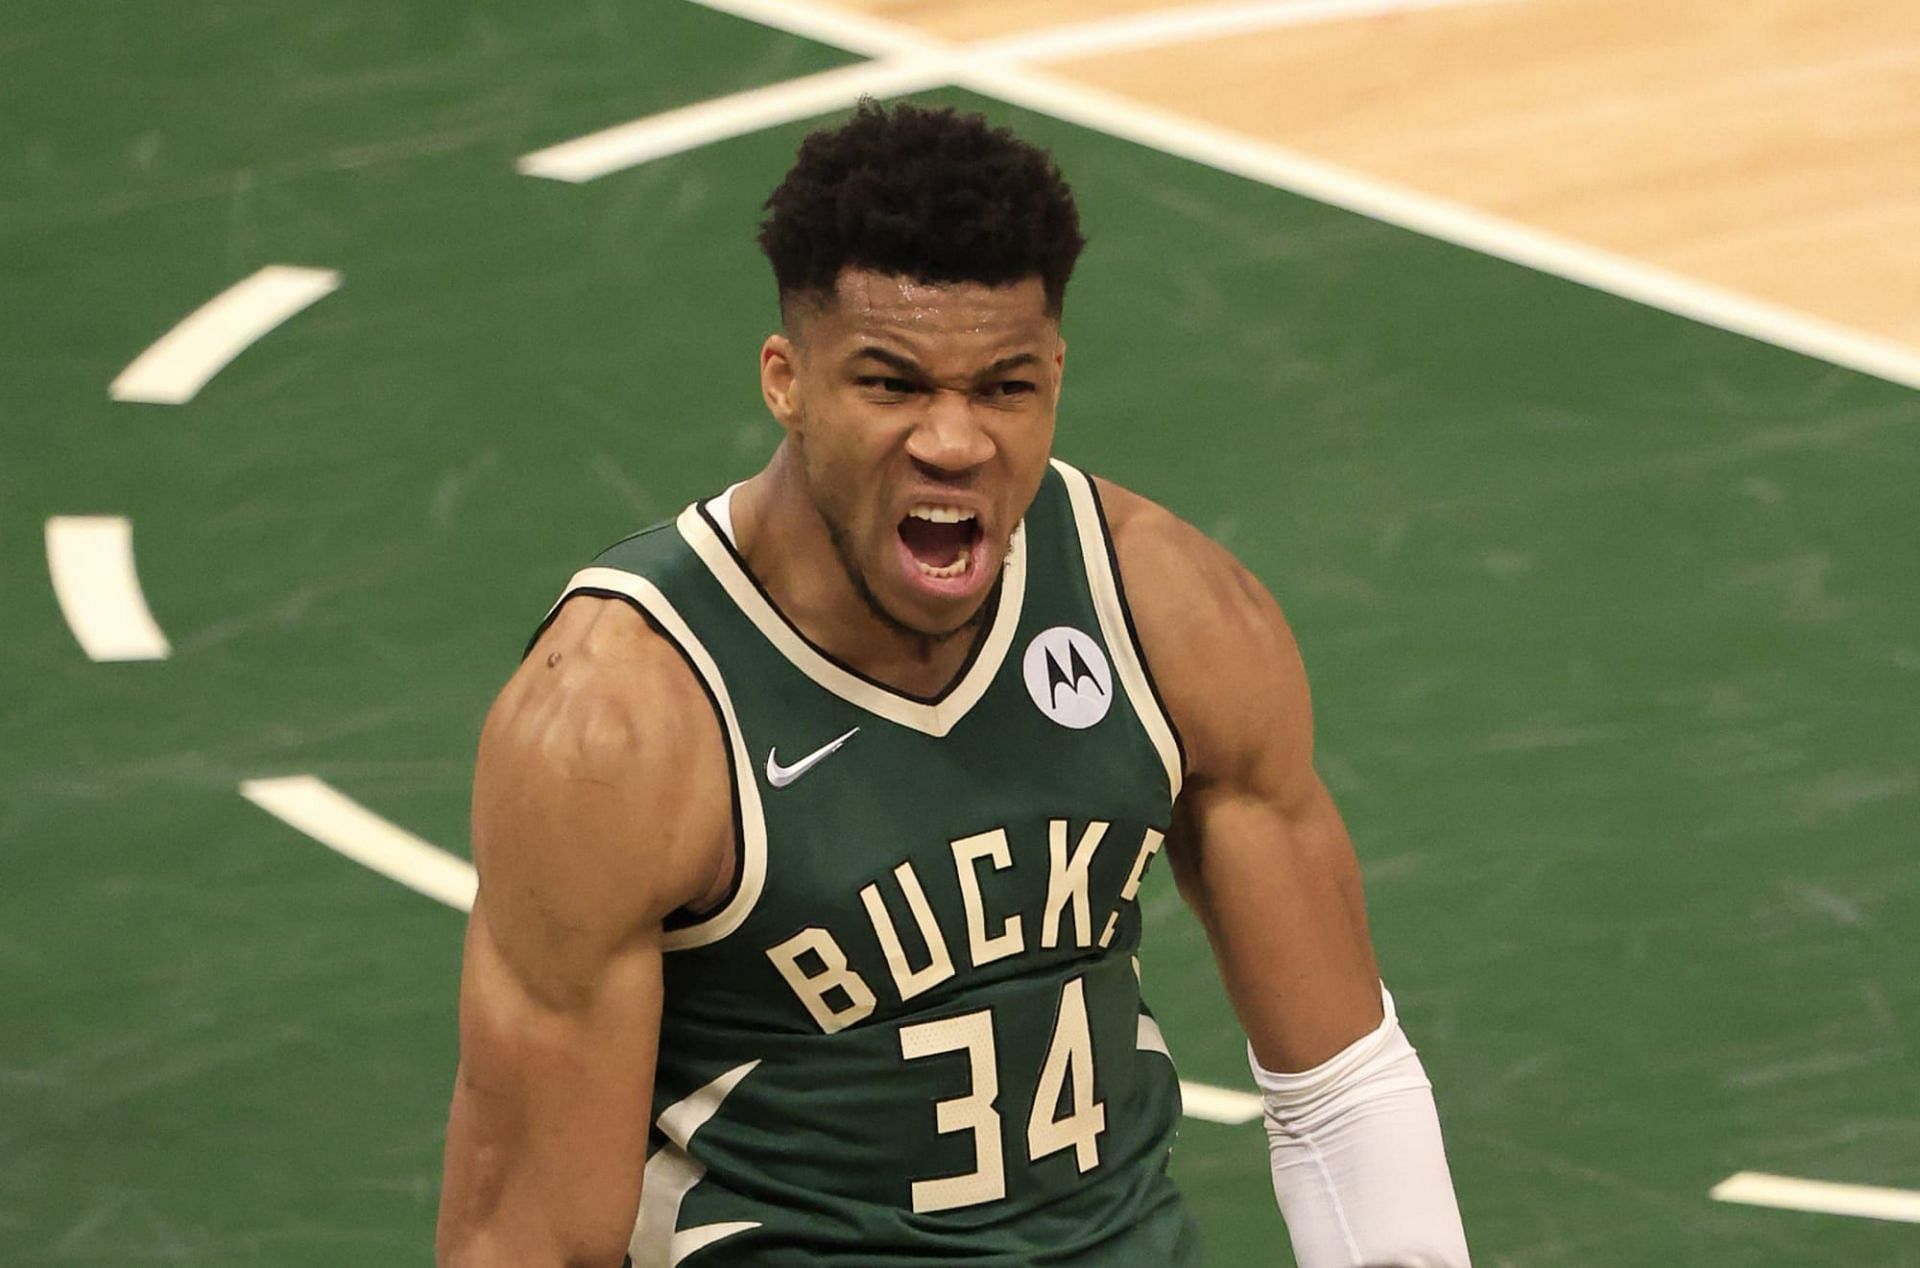 Milwaukee Bucks superstar Giannis Antetokounmpo is firmly in the Defensive Player of the Year discussion.